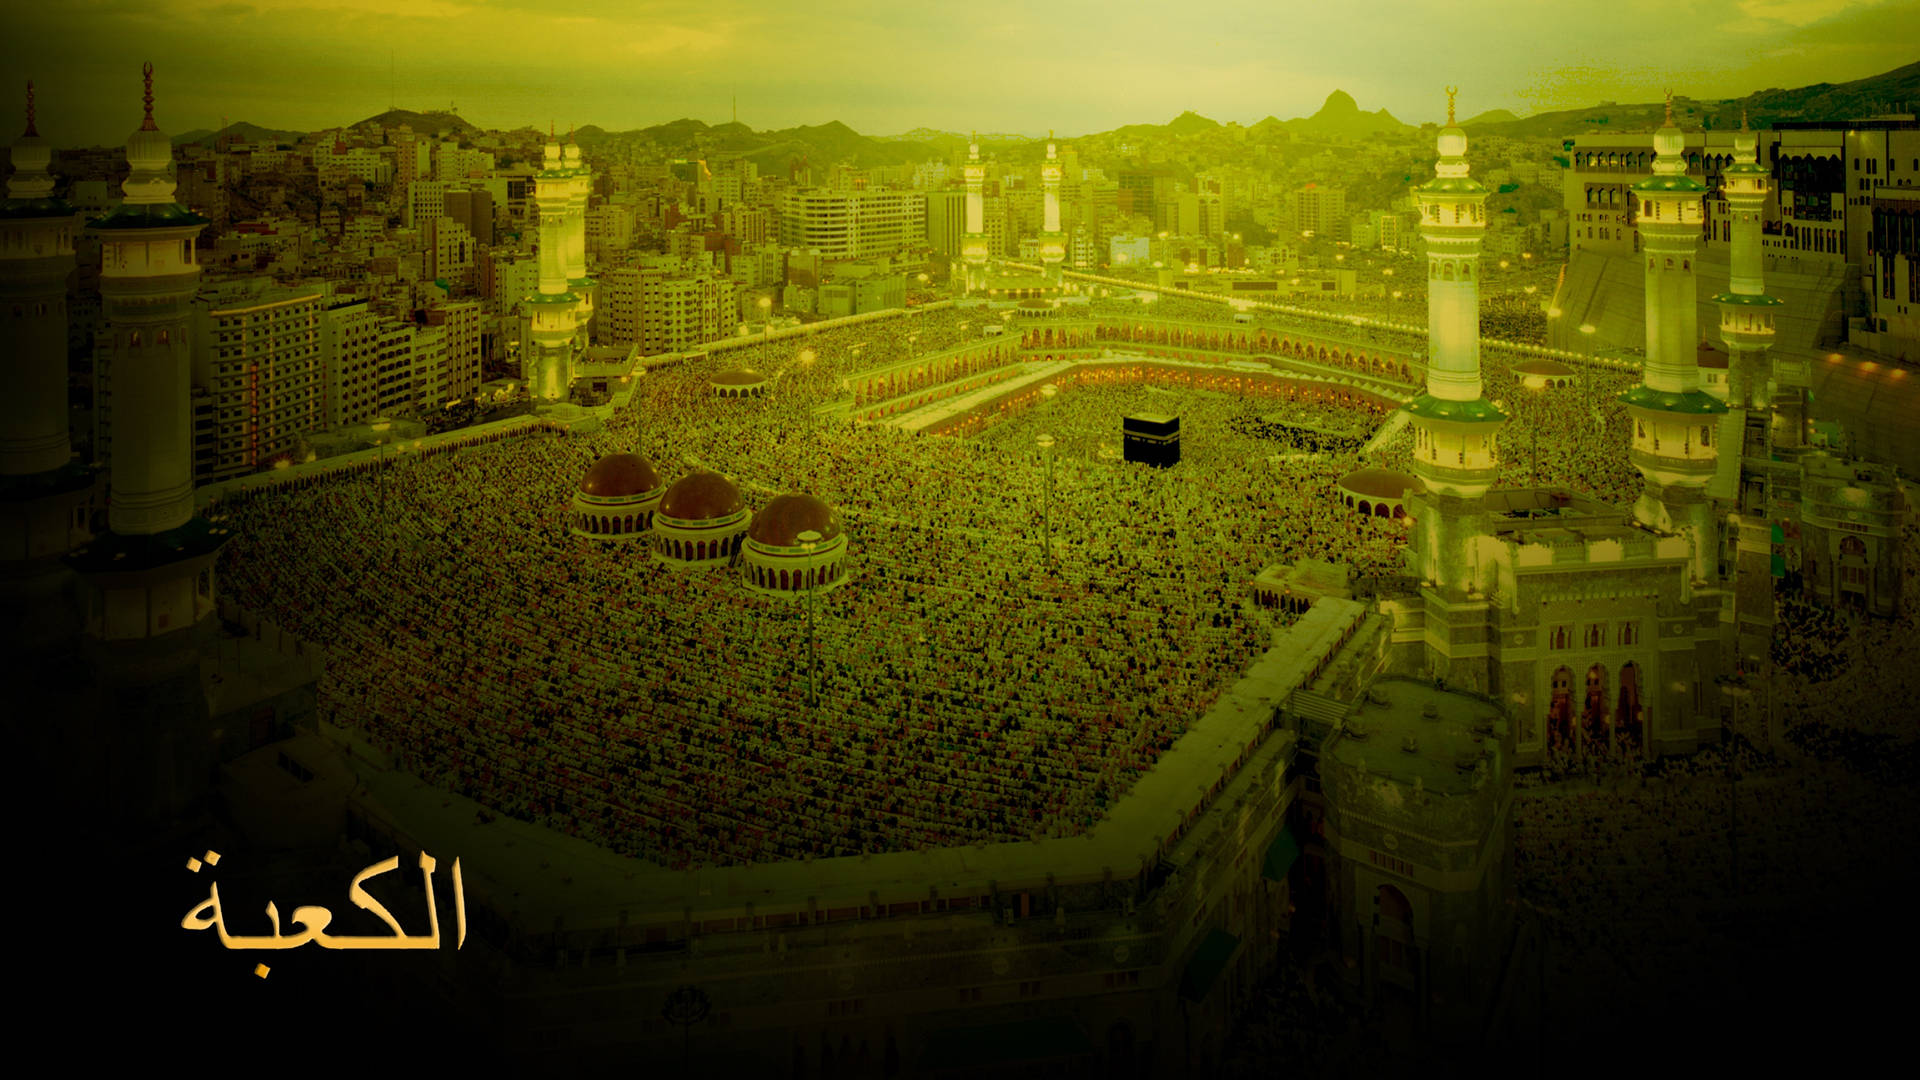 Kaaba Green Filter Background